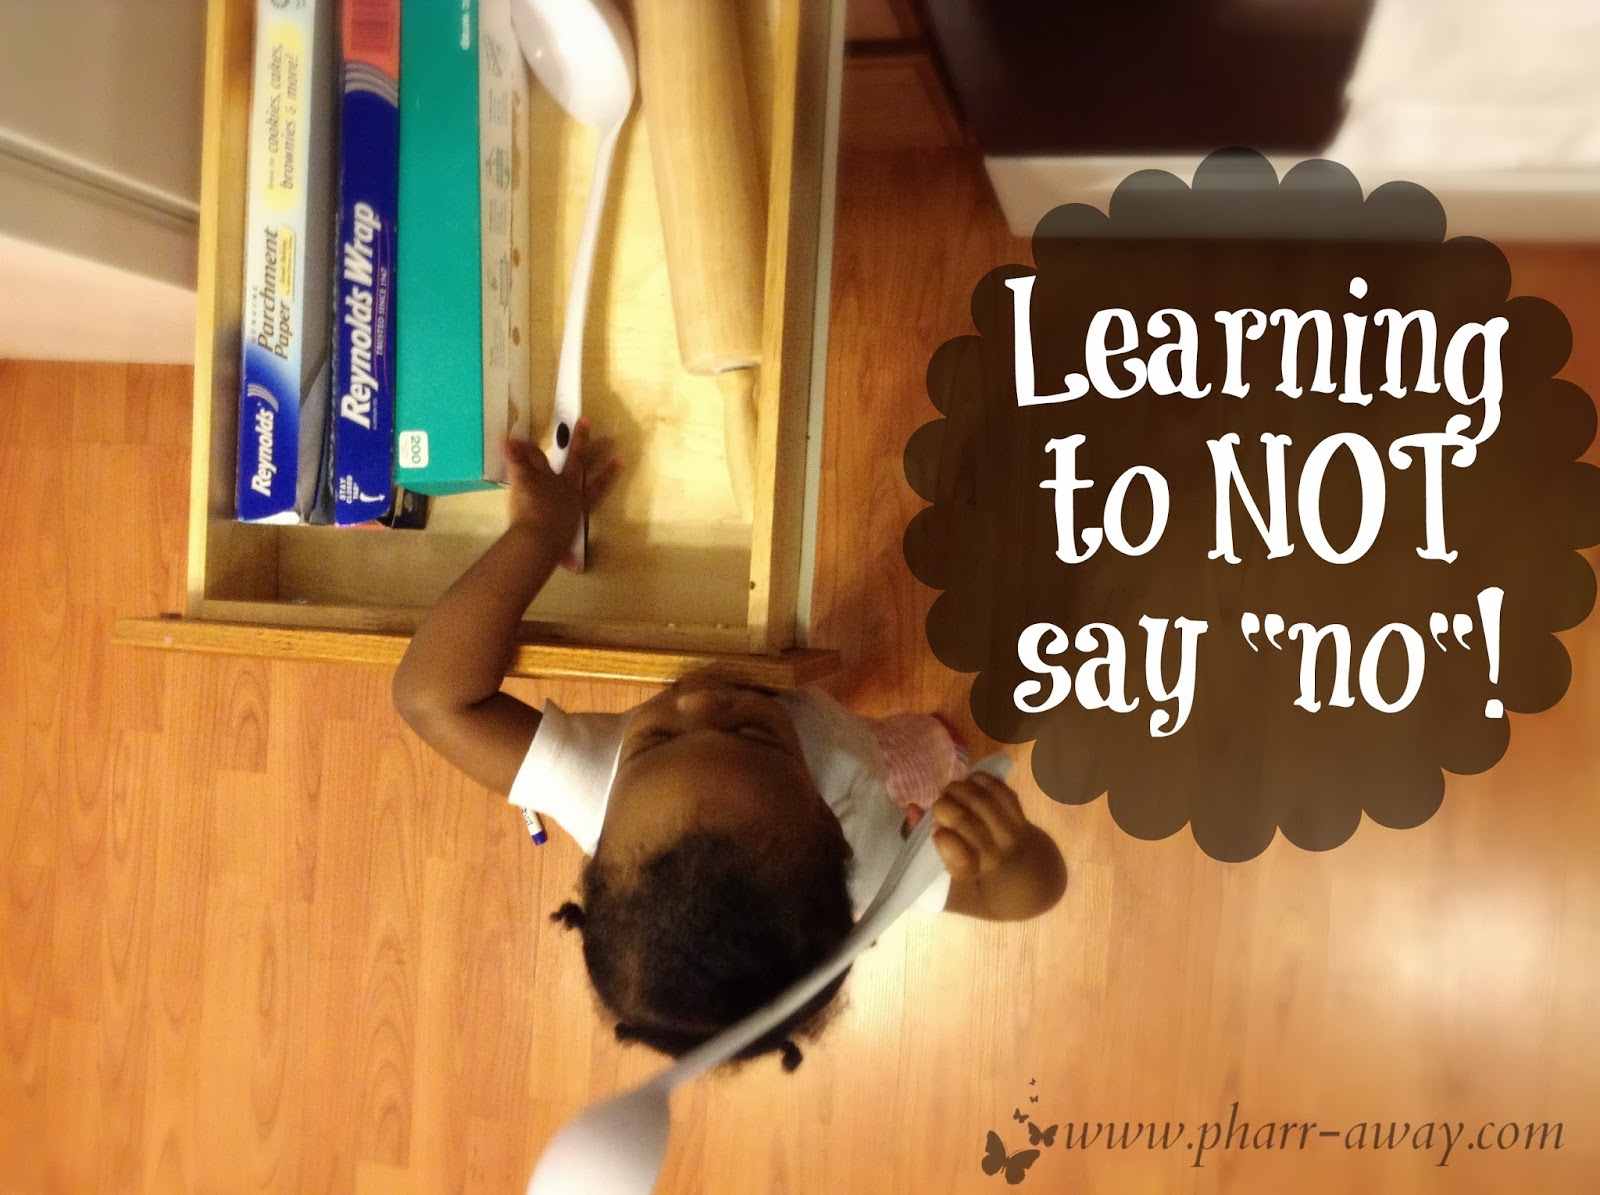 Learning to NOT say "No"!